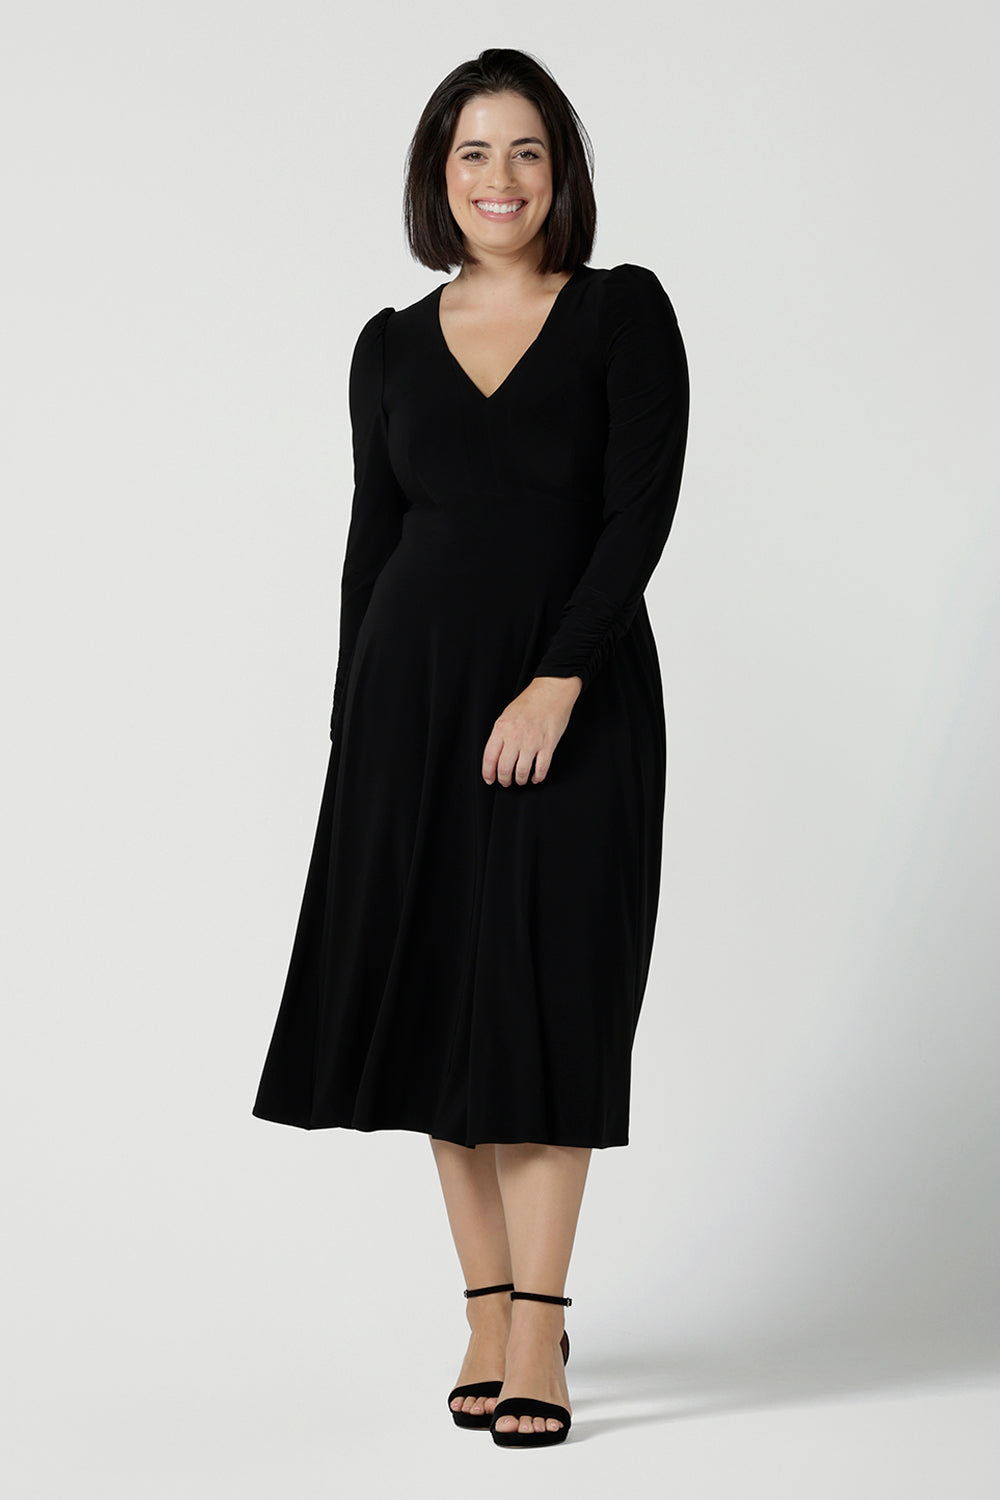 Size 10 Alyssa Dress in jersey. V-neckline style great for work to weekend wear. Corporate dress for women. Travel friendly with an empire line style. Midi dress and styled back with black strappy heels. Made in Australia for women size 8 - 24.